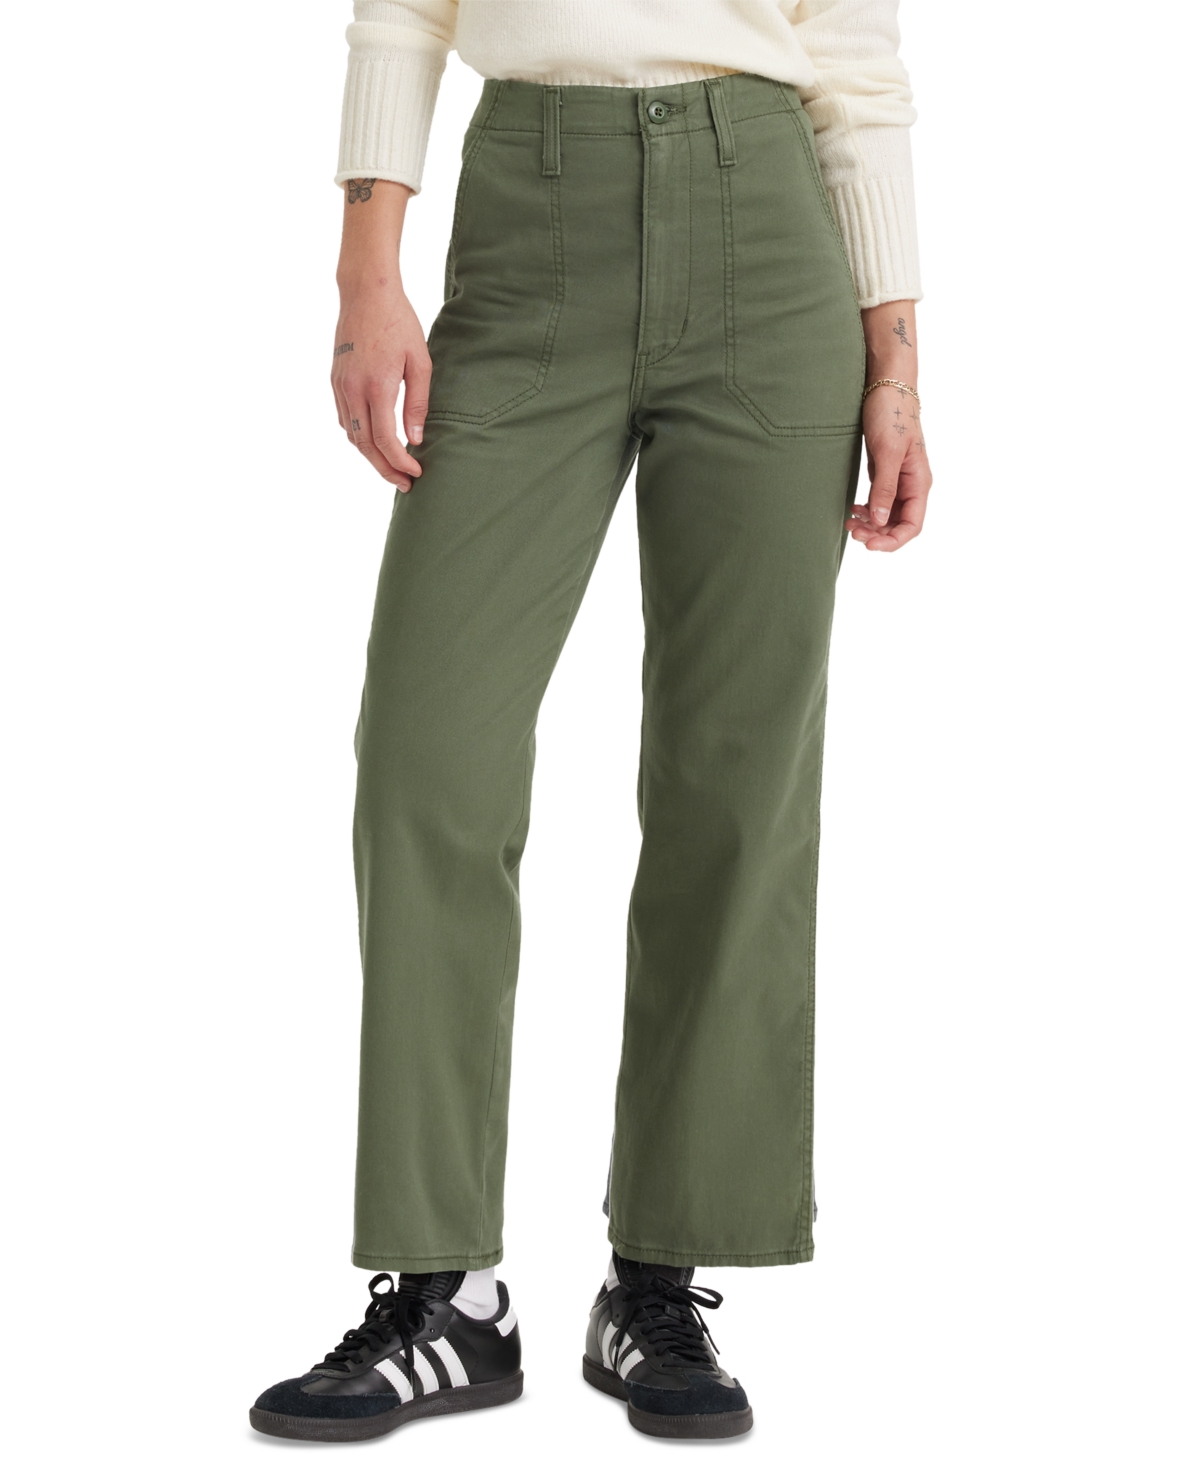 Levi's Women's Surplus High Rise Straight-leg Pants In Thyme Twill